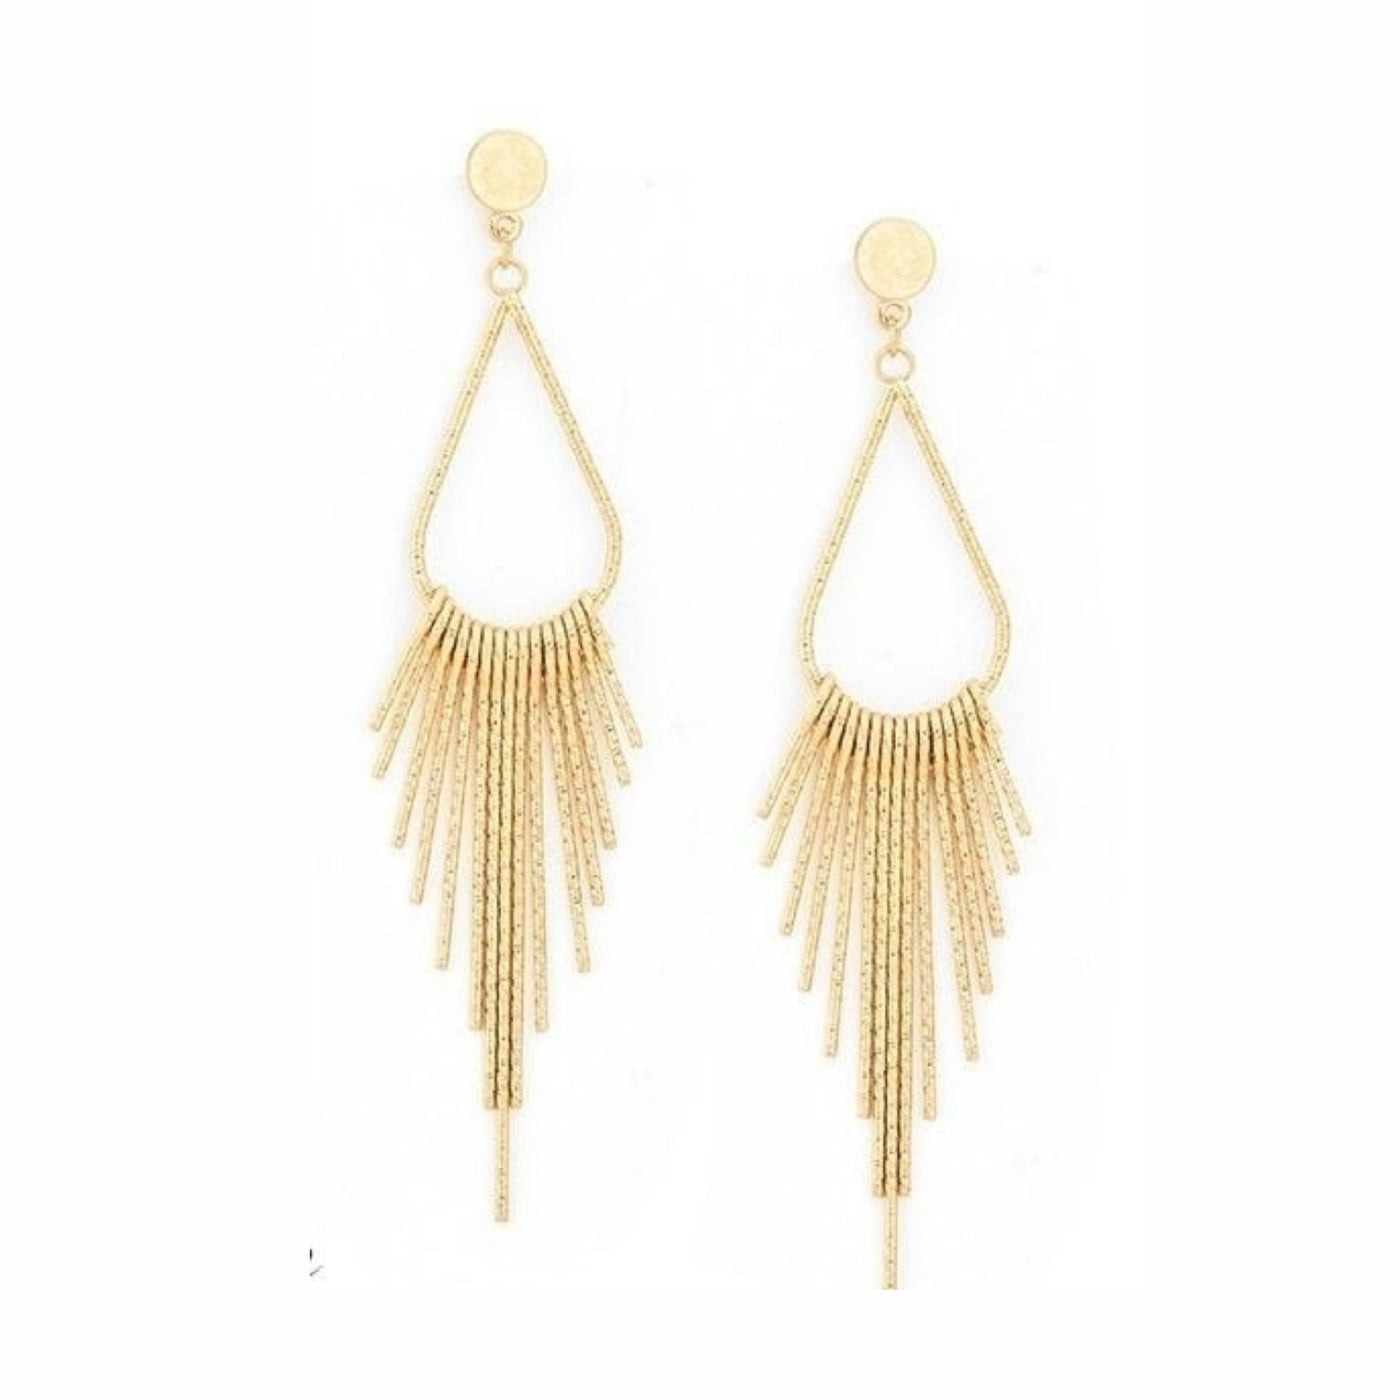 Long Tassel Earrings in Gold or Silver - Roses & Chains | Fashionable Clothing, Shoes, Accessories, & More